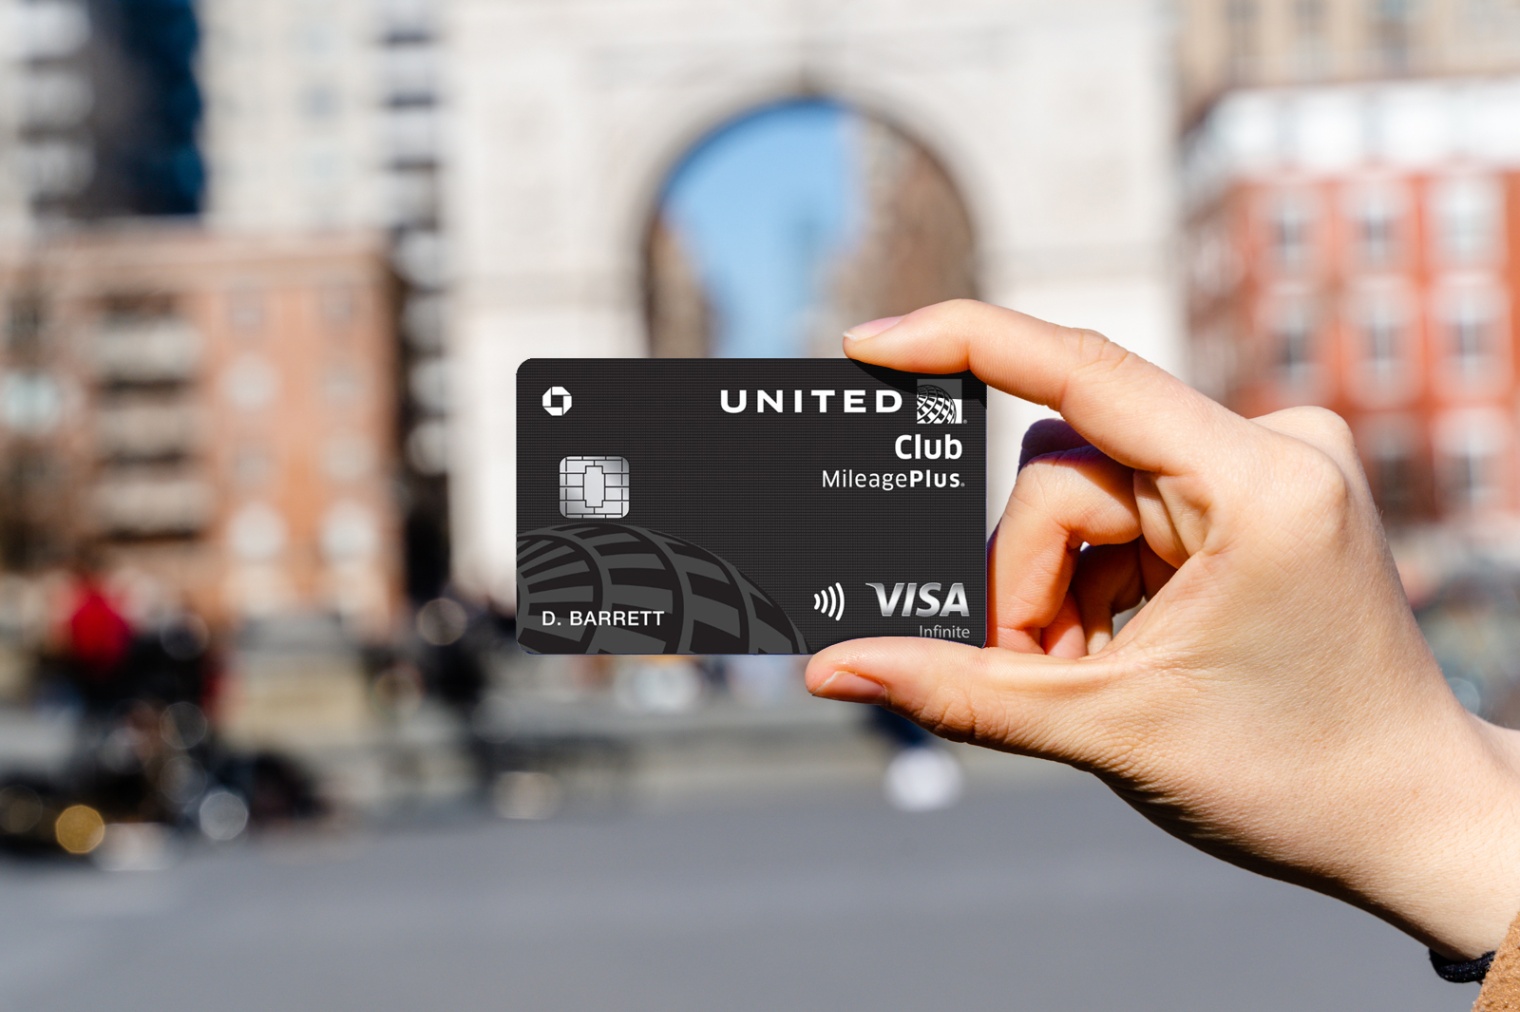 Find Out How To Apply For The United Club Infinite Card